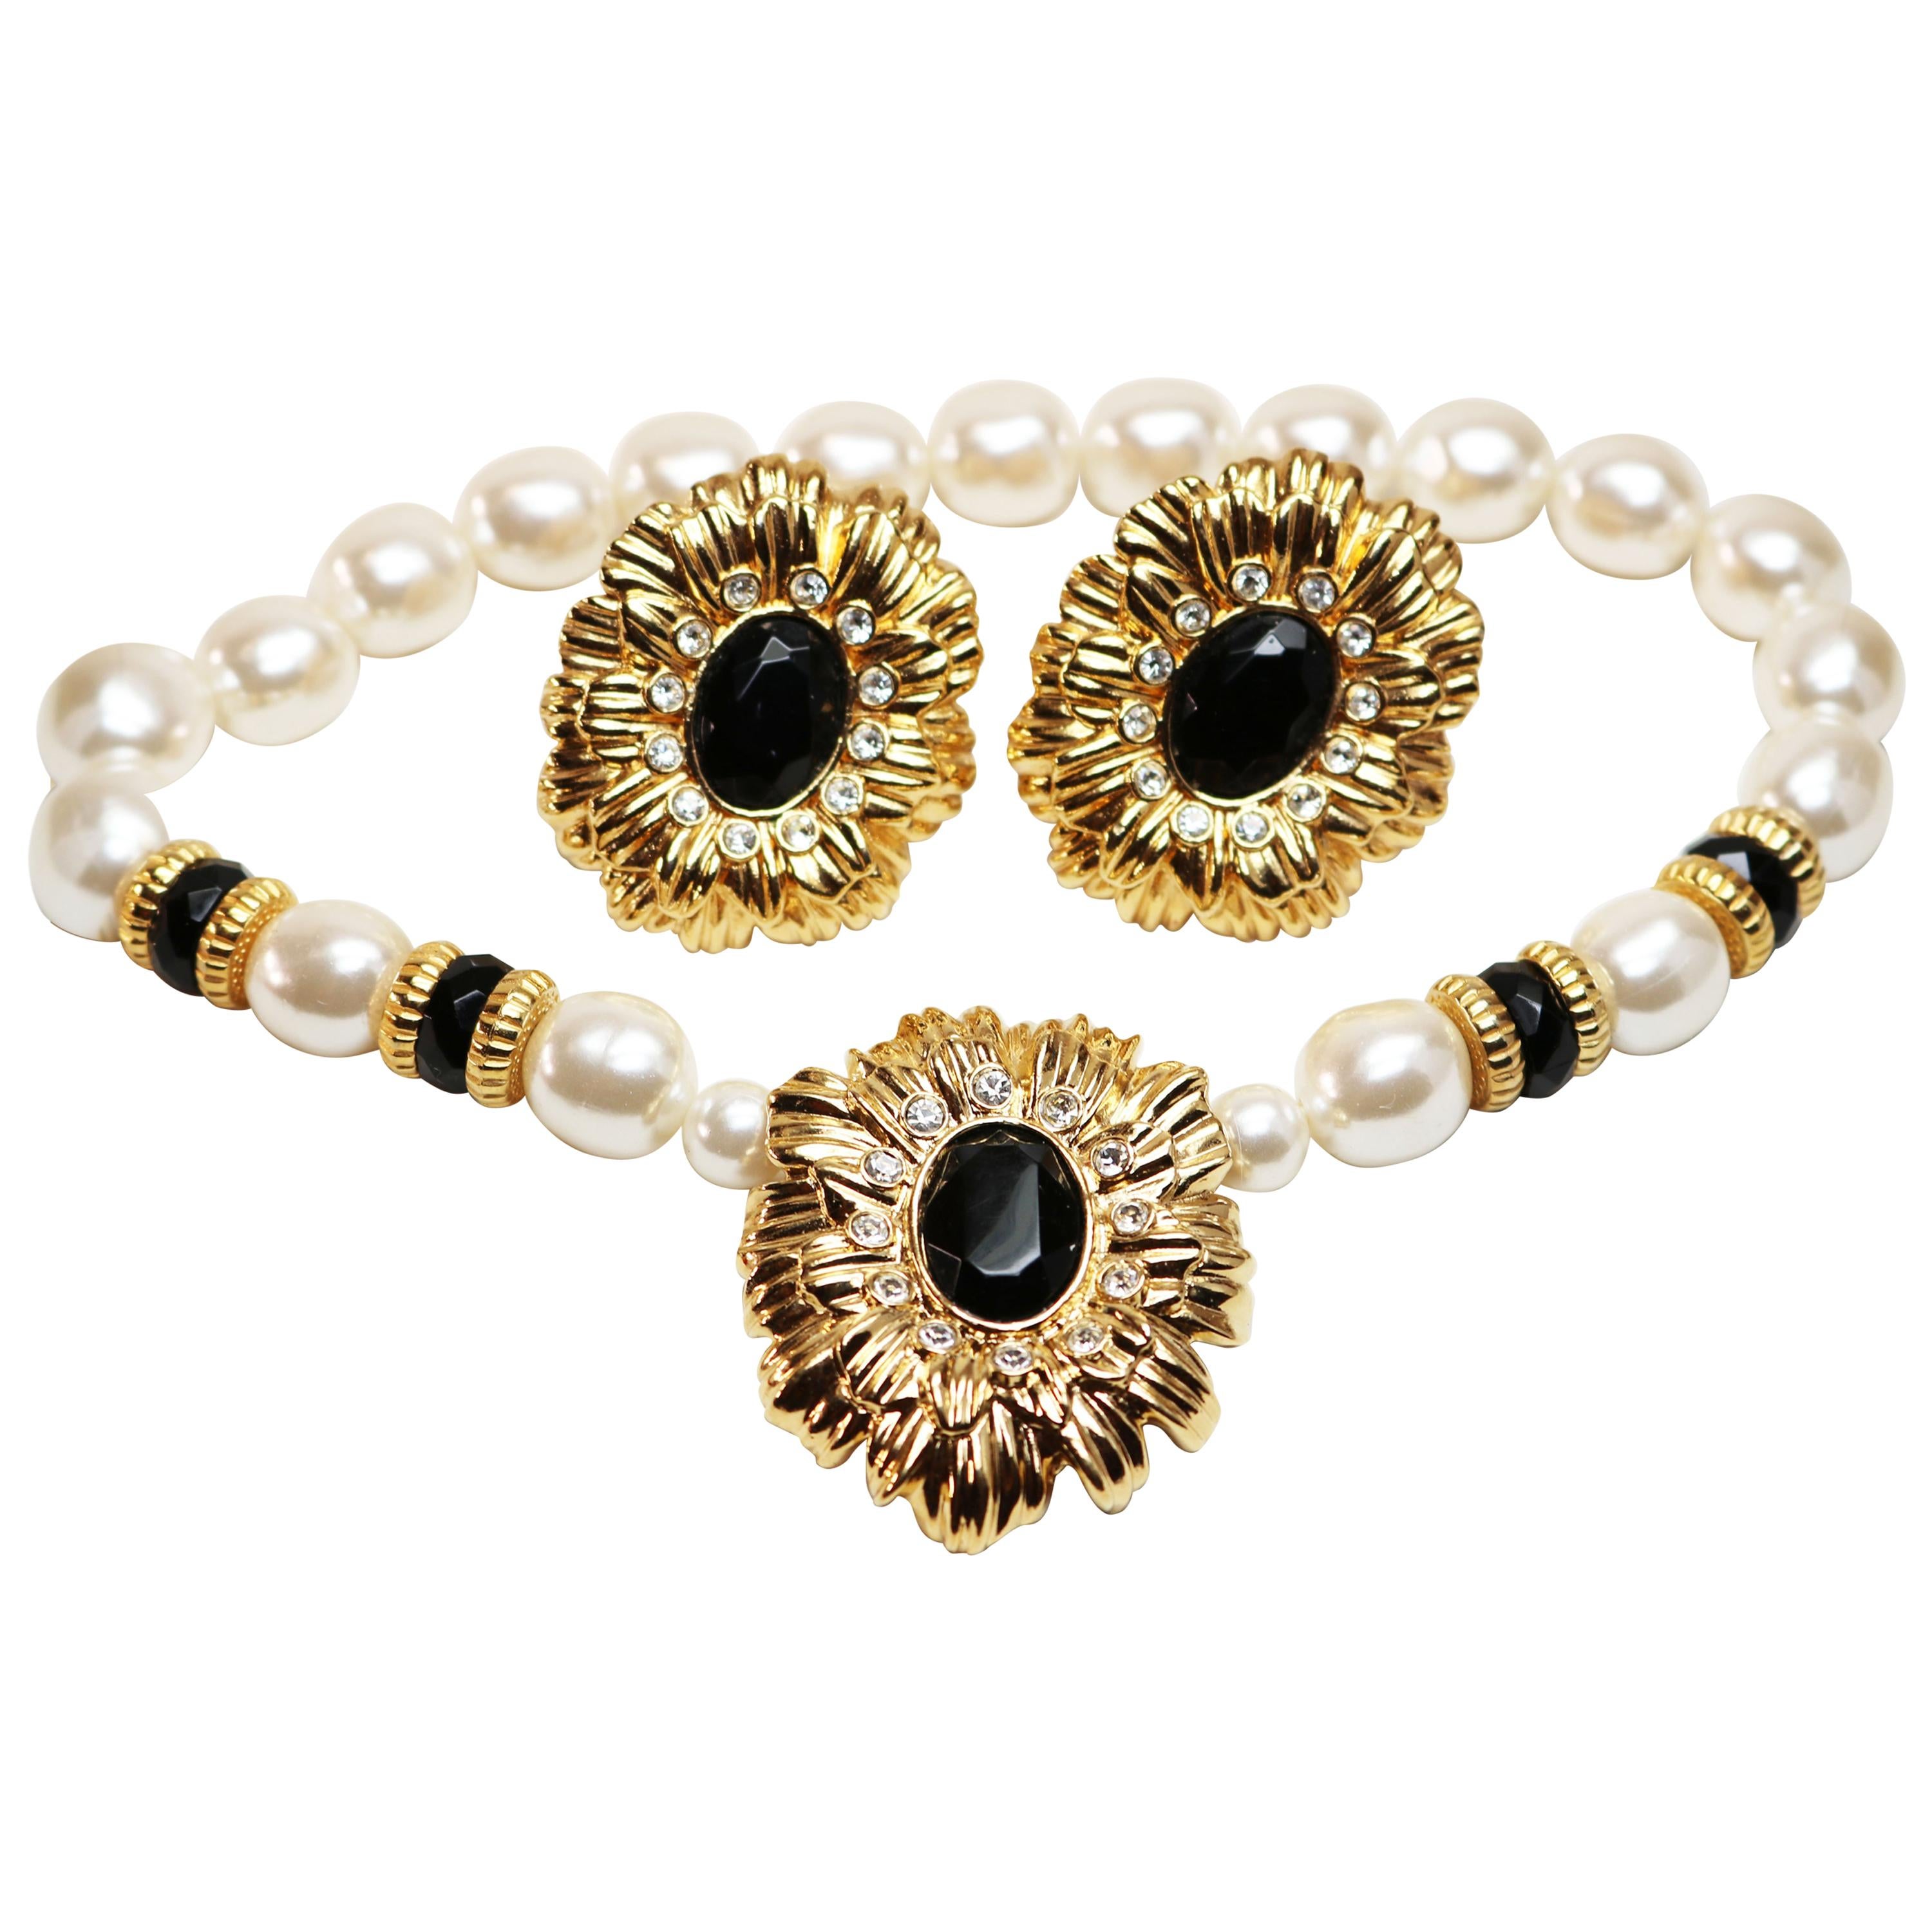 Kenneth Jay Lane Sunflower Necklace and Earrings For Sale